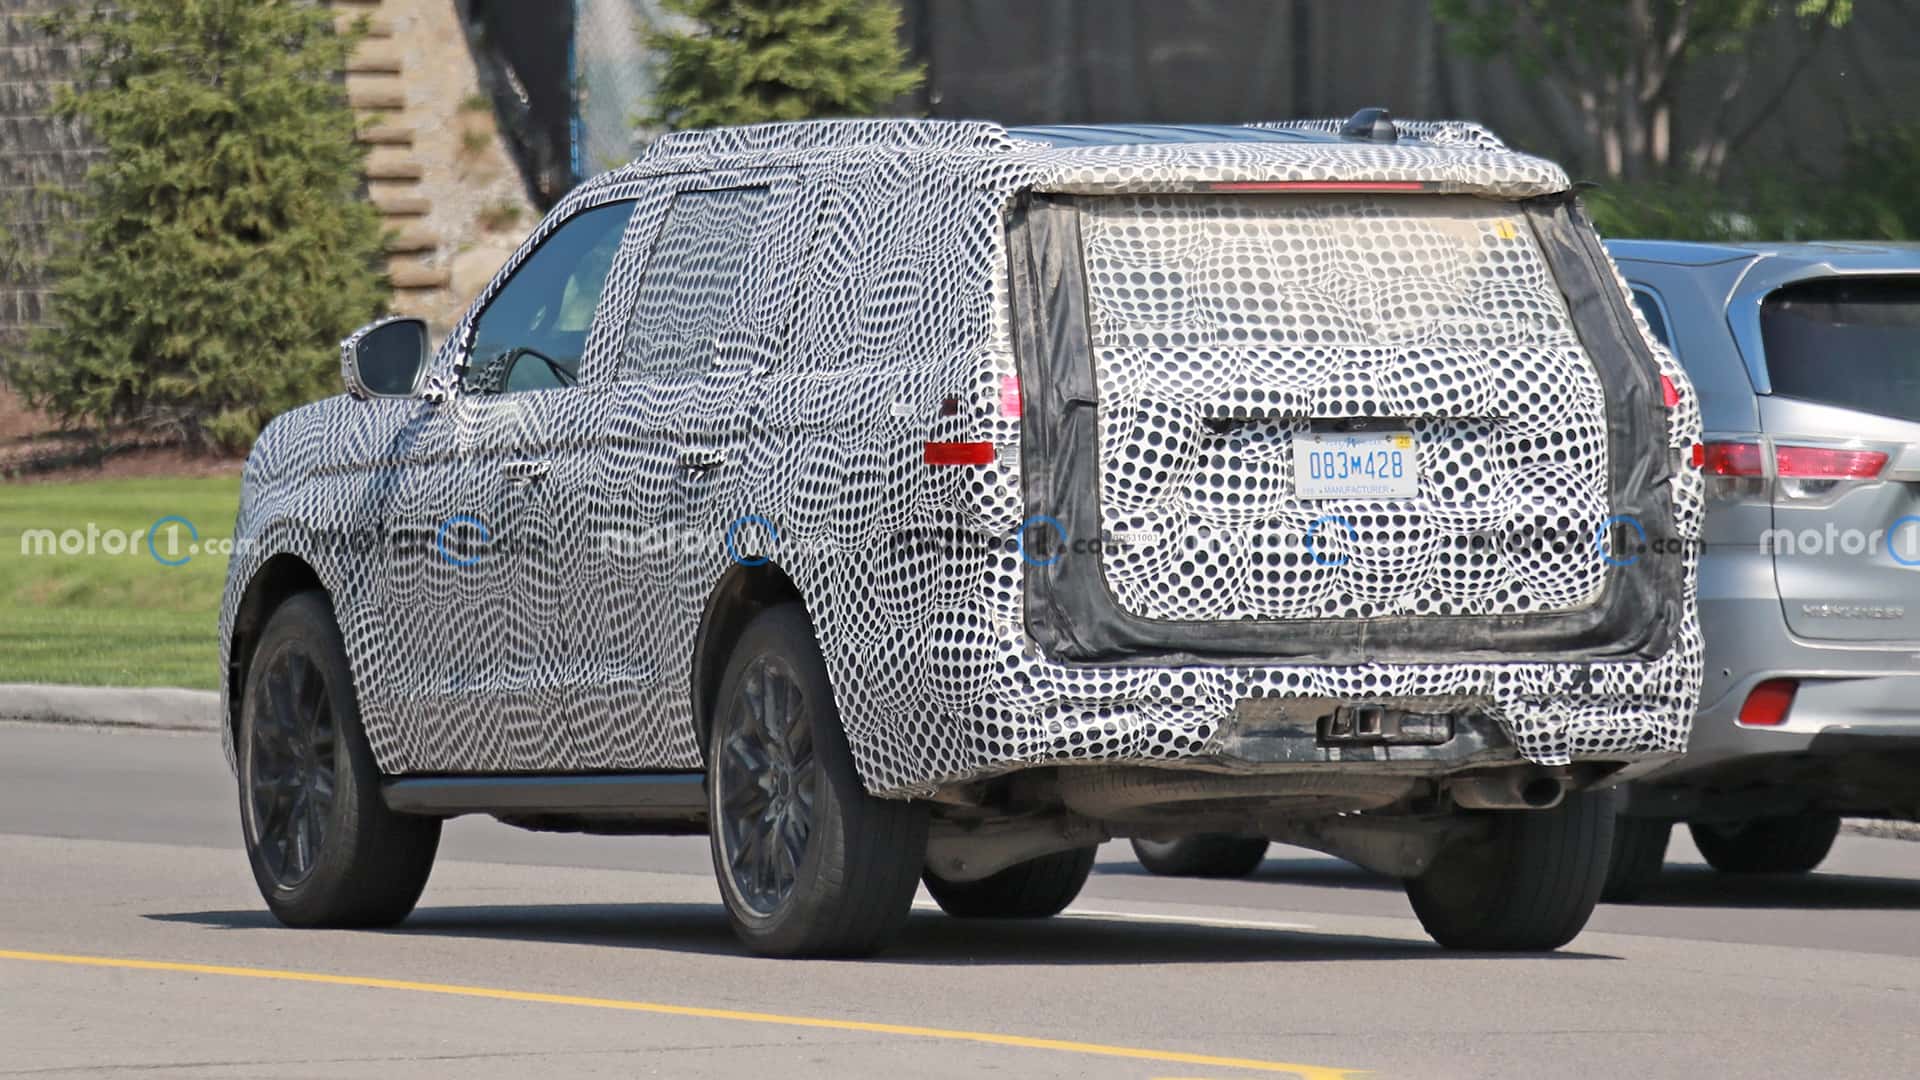 next-gen-ford-expedition-rear-view-spy-photo.jpg